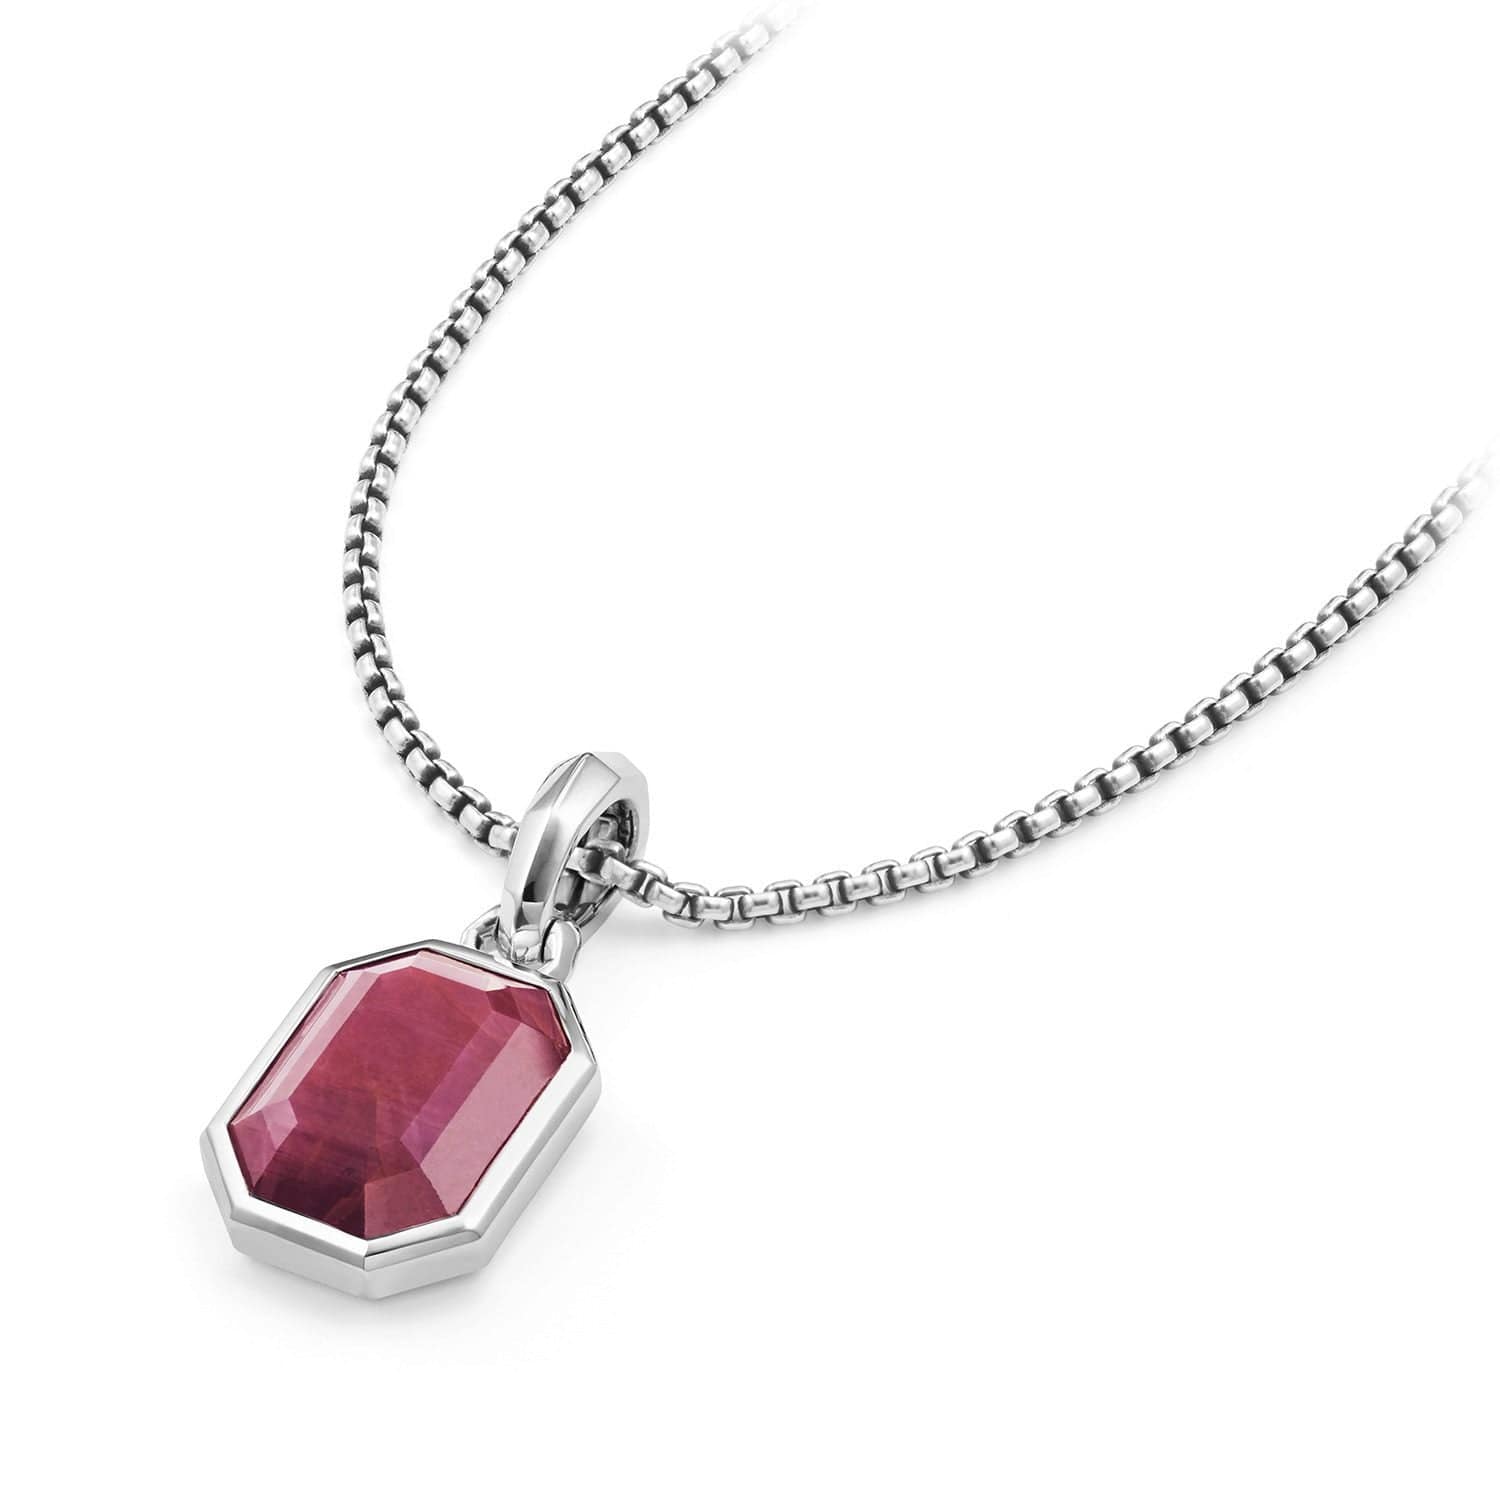 Emerald Cut Amulet with Indian Ruby